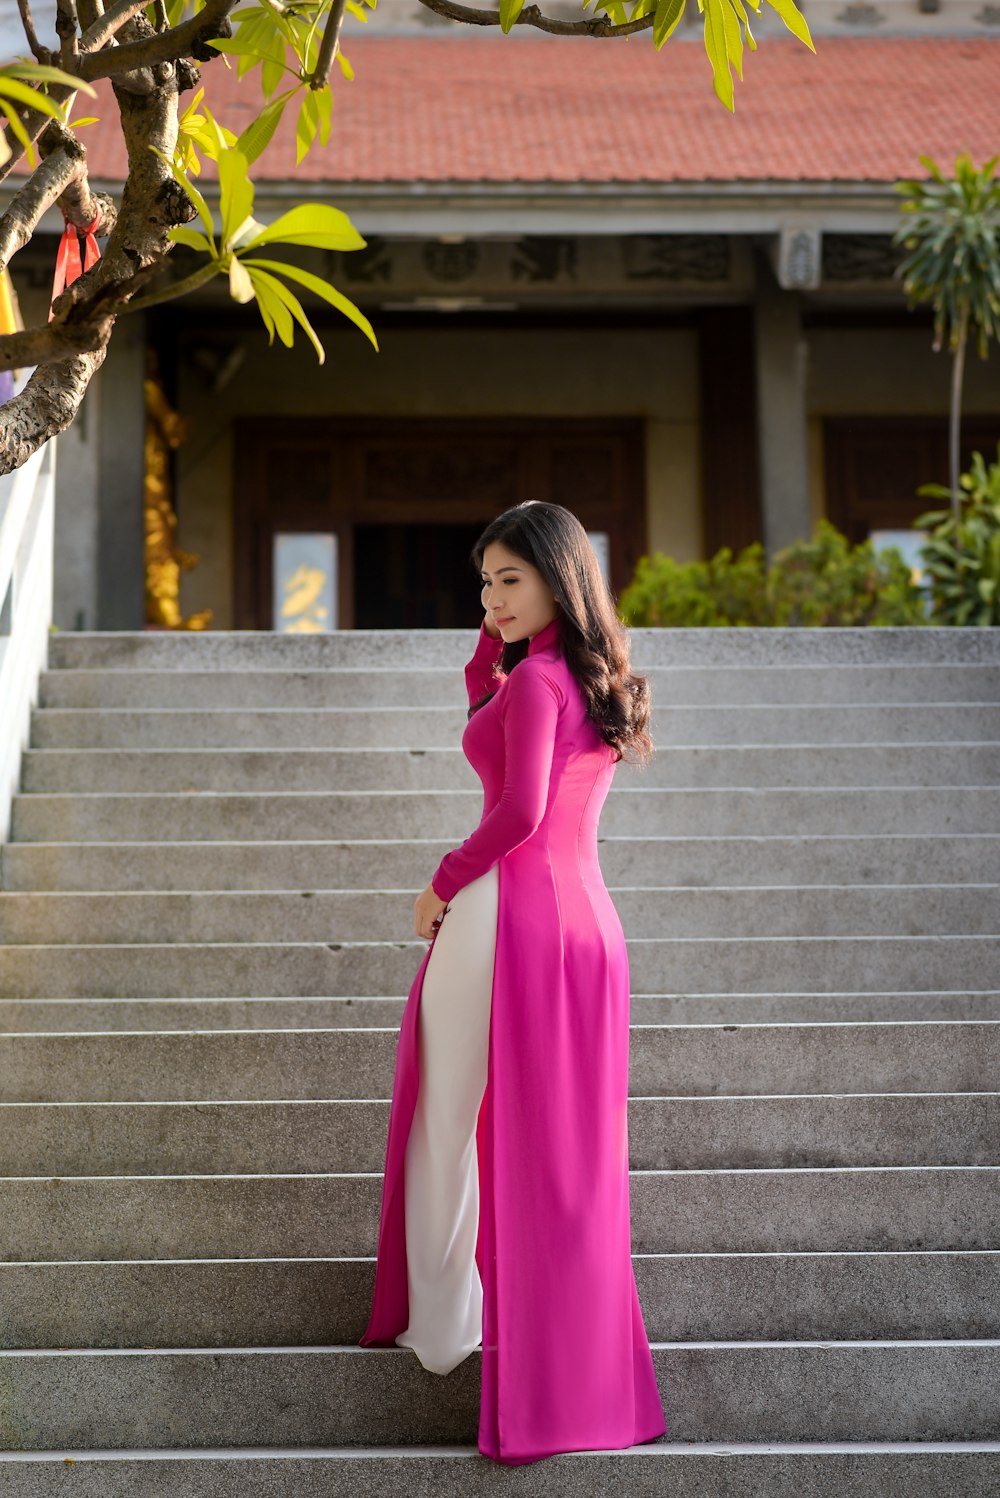 woman in pink long sleeve dress standing on gray concrete stairs